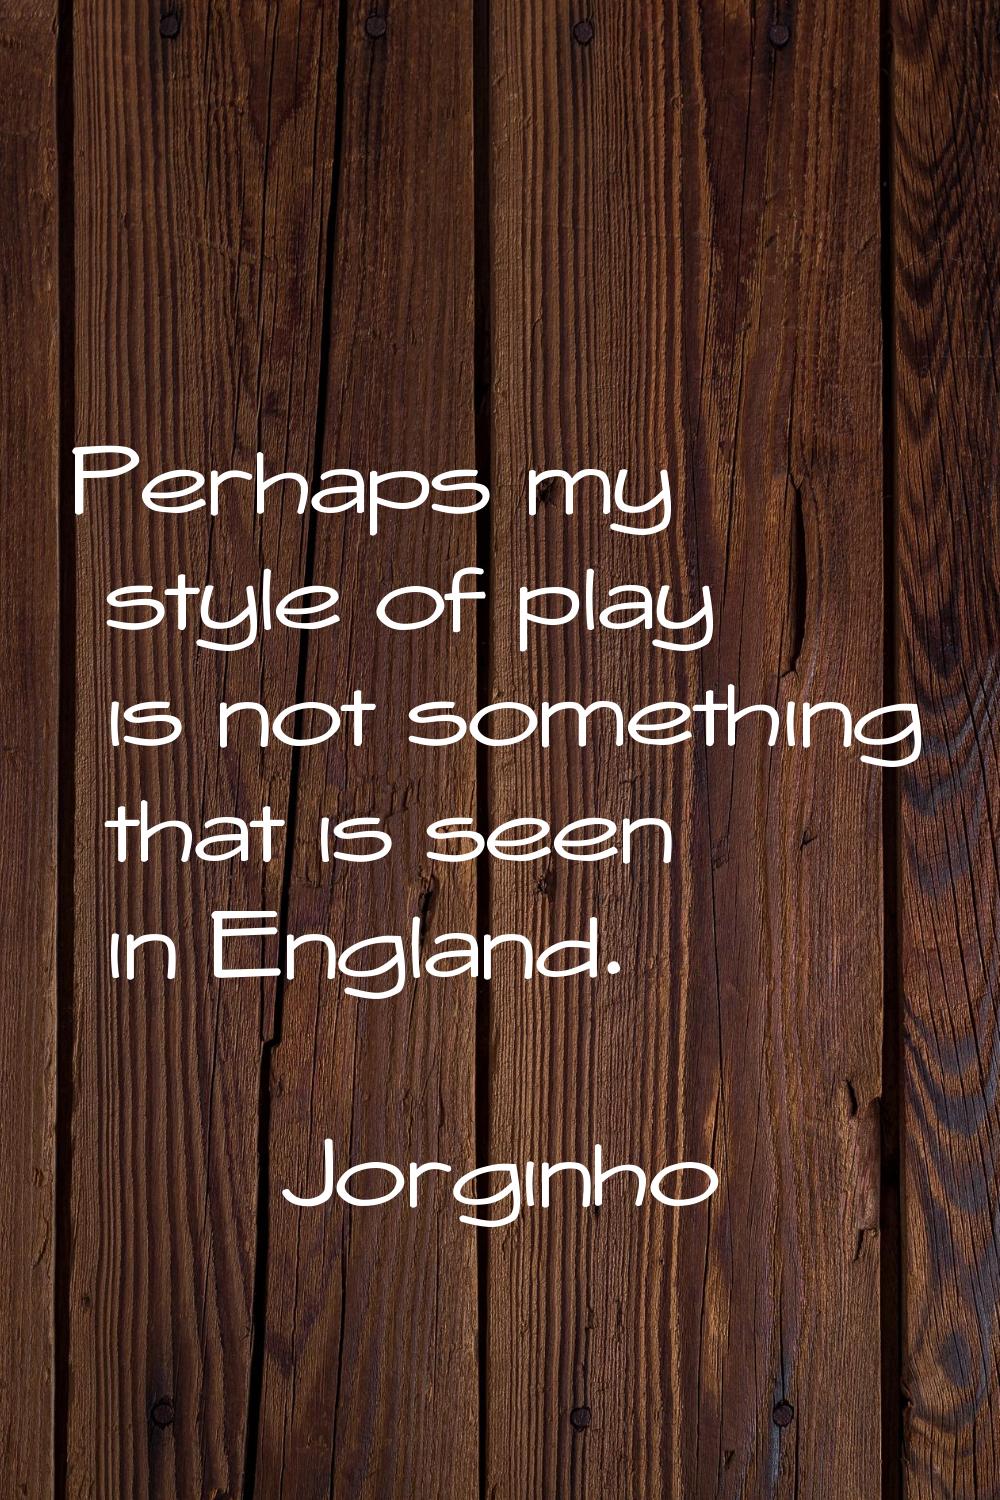 Perhaps my style of play is not something that is seen in England.